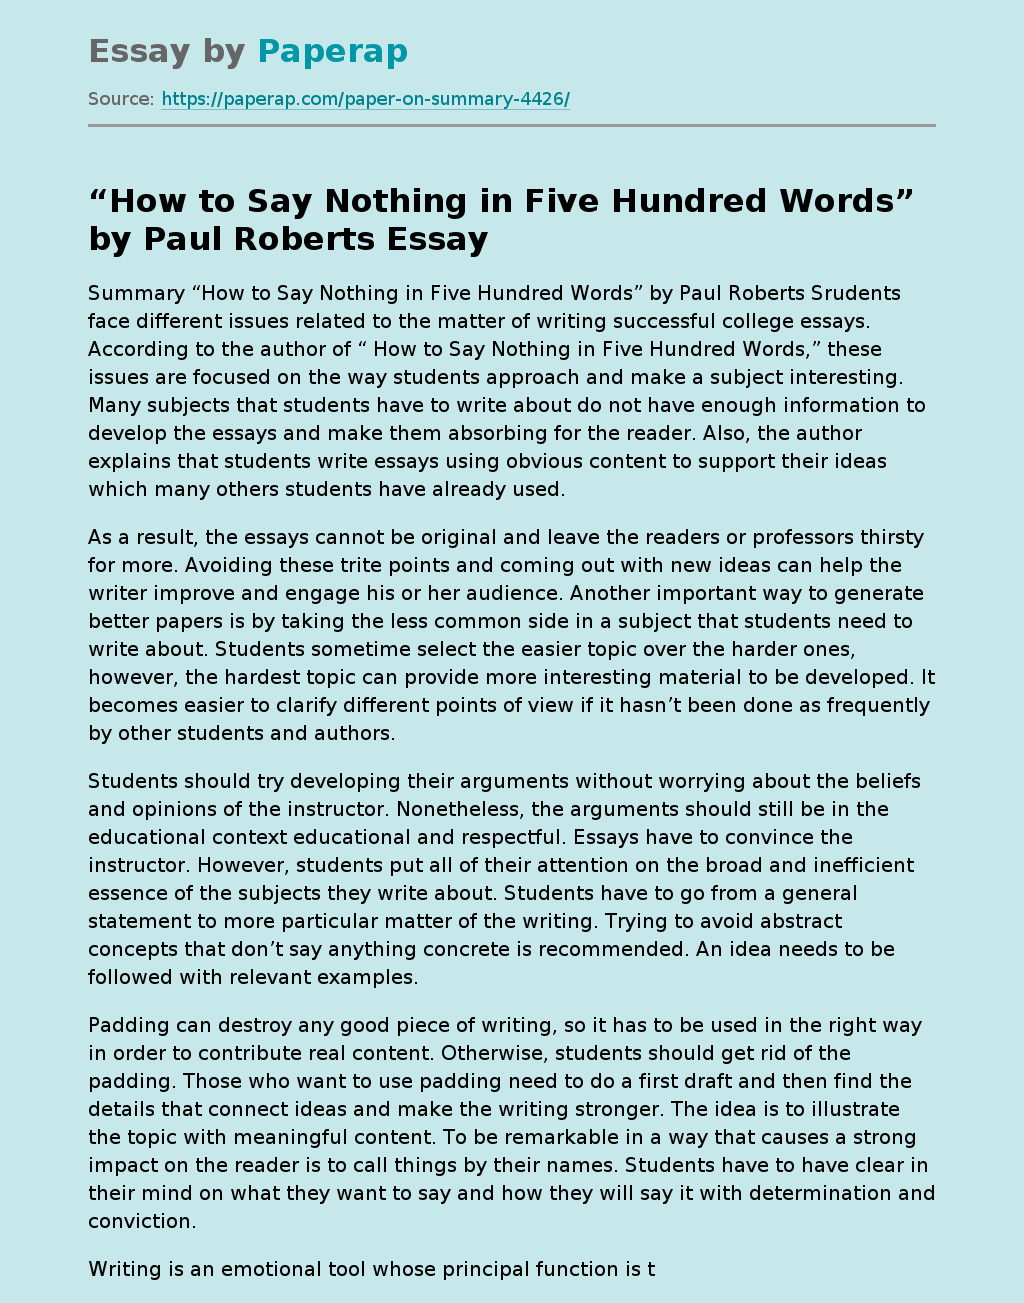 How to Say Nothing in Five Hundred Words by Paul Roberts